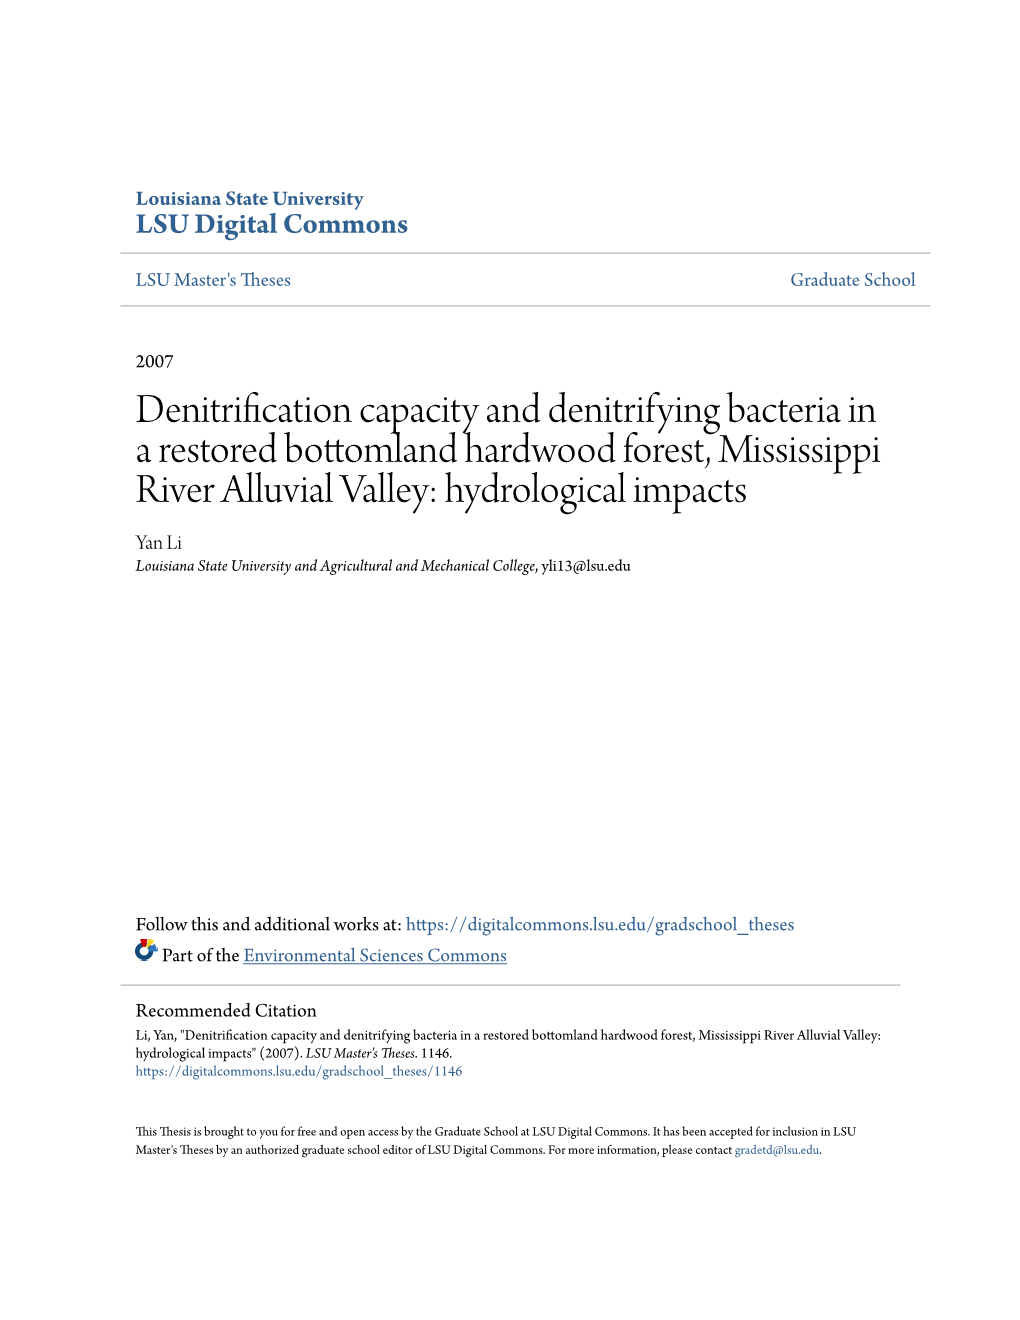 Denitrification Capacity and Denitrifying Bacteria in a Restored